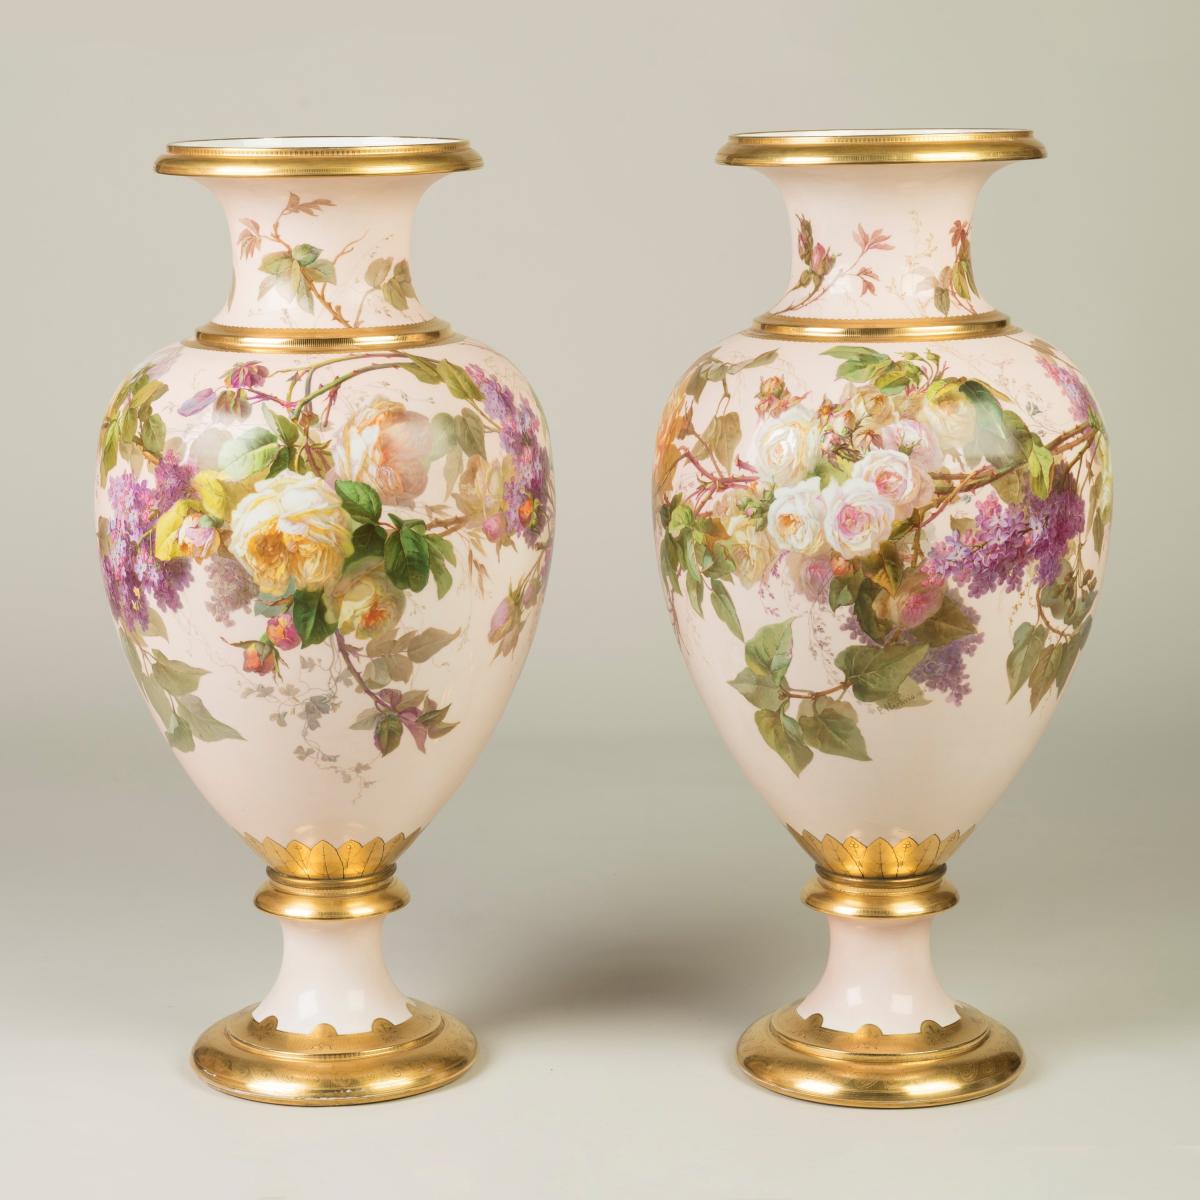 A Rare Pair of Pink Paris Porcelain Vases  The rare pink colour made popular in the 1870s and favoured by the Empress Eugenie, with delicate two-tone gilding, both vases of ovoid baluster shape, on a shaped foot, with floral motifs depicting roses, purple bellfowers and foliage with delicate realism. Both signed by the artist P. Hartwig, with one dated 1876, keeping their original character and condition. French, one dated 1876